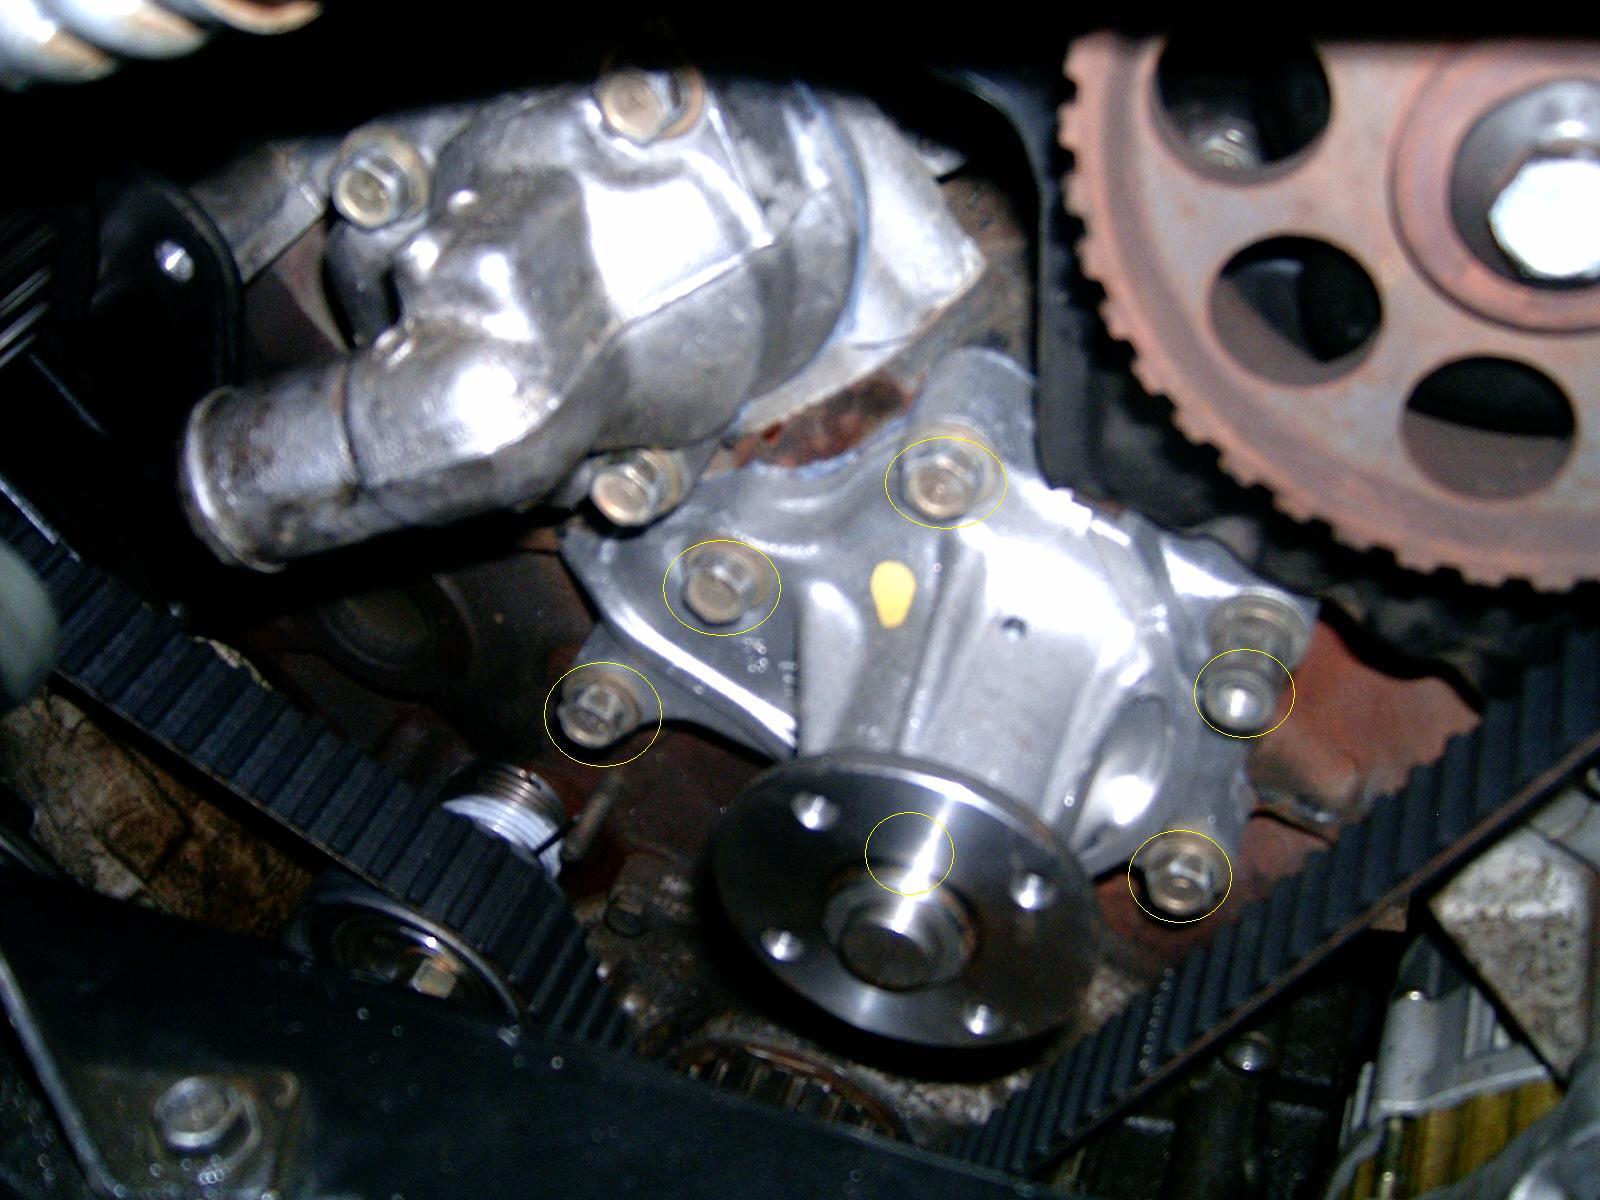 1995 Nissan maxima water pump replacement #4